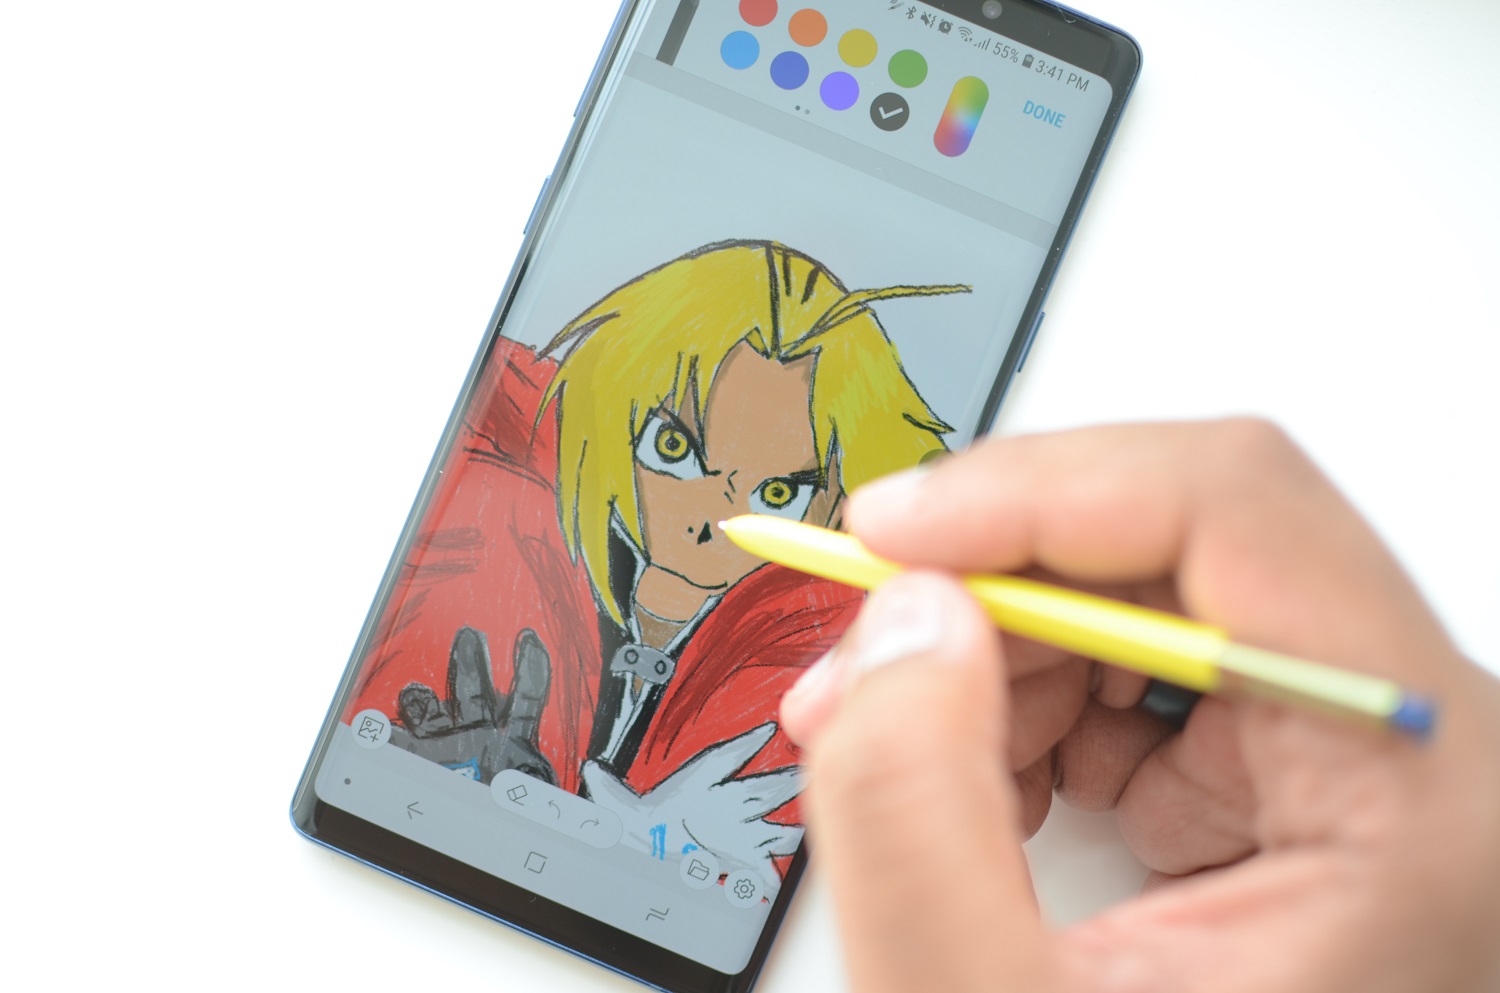 Samsung PENUP app update adds very useful drawing options  SamMobile   SamMobile